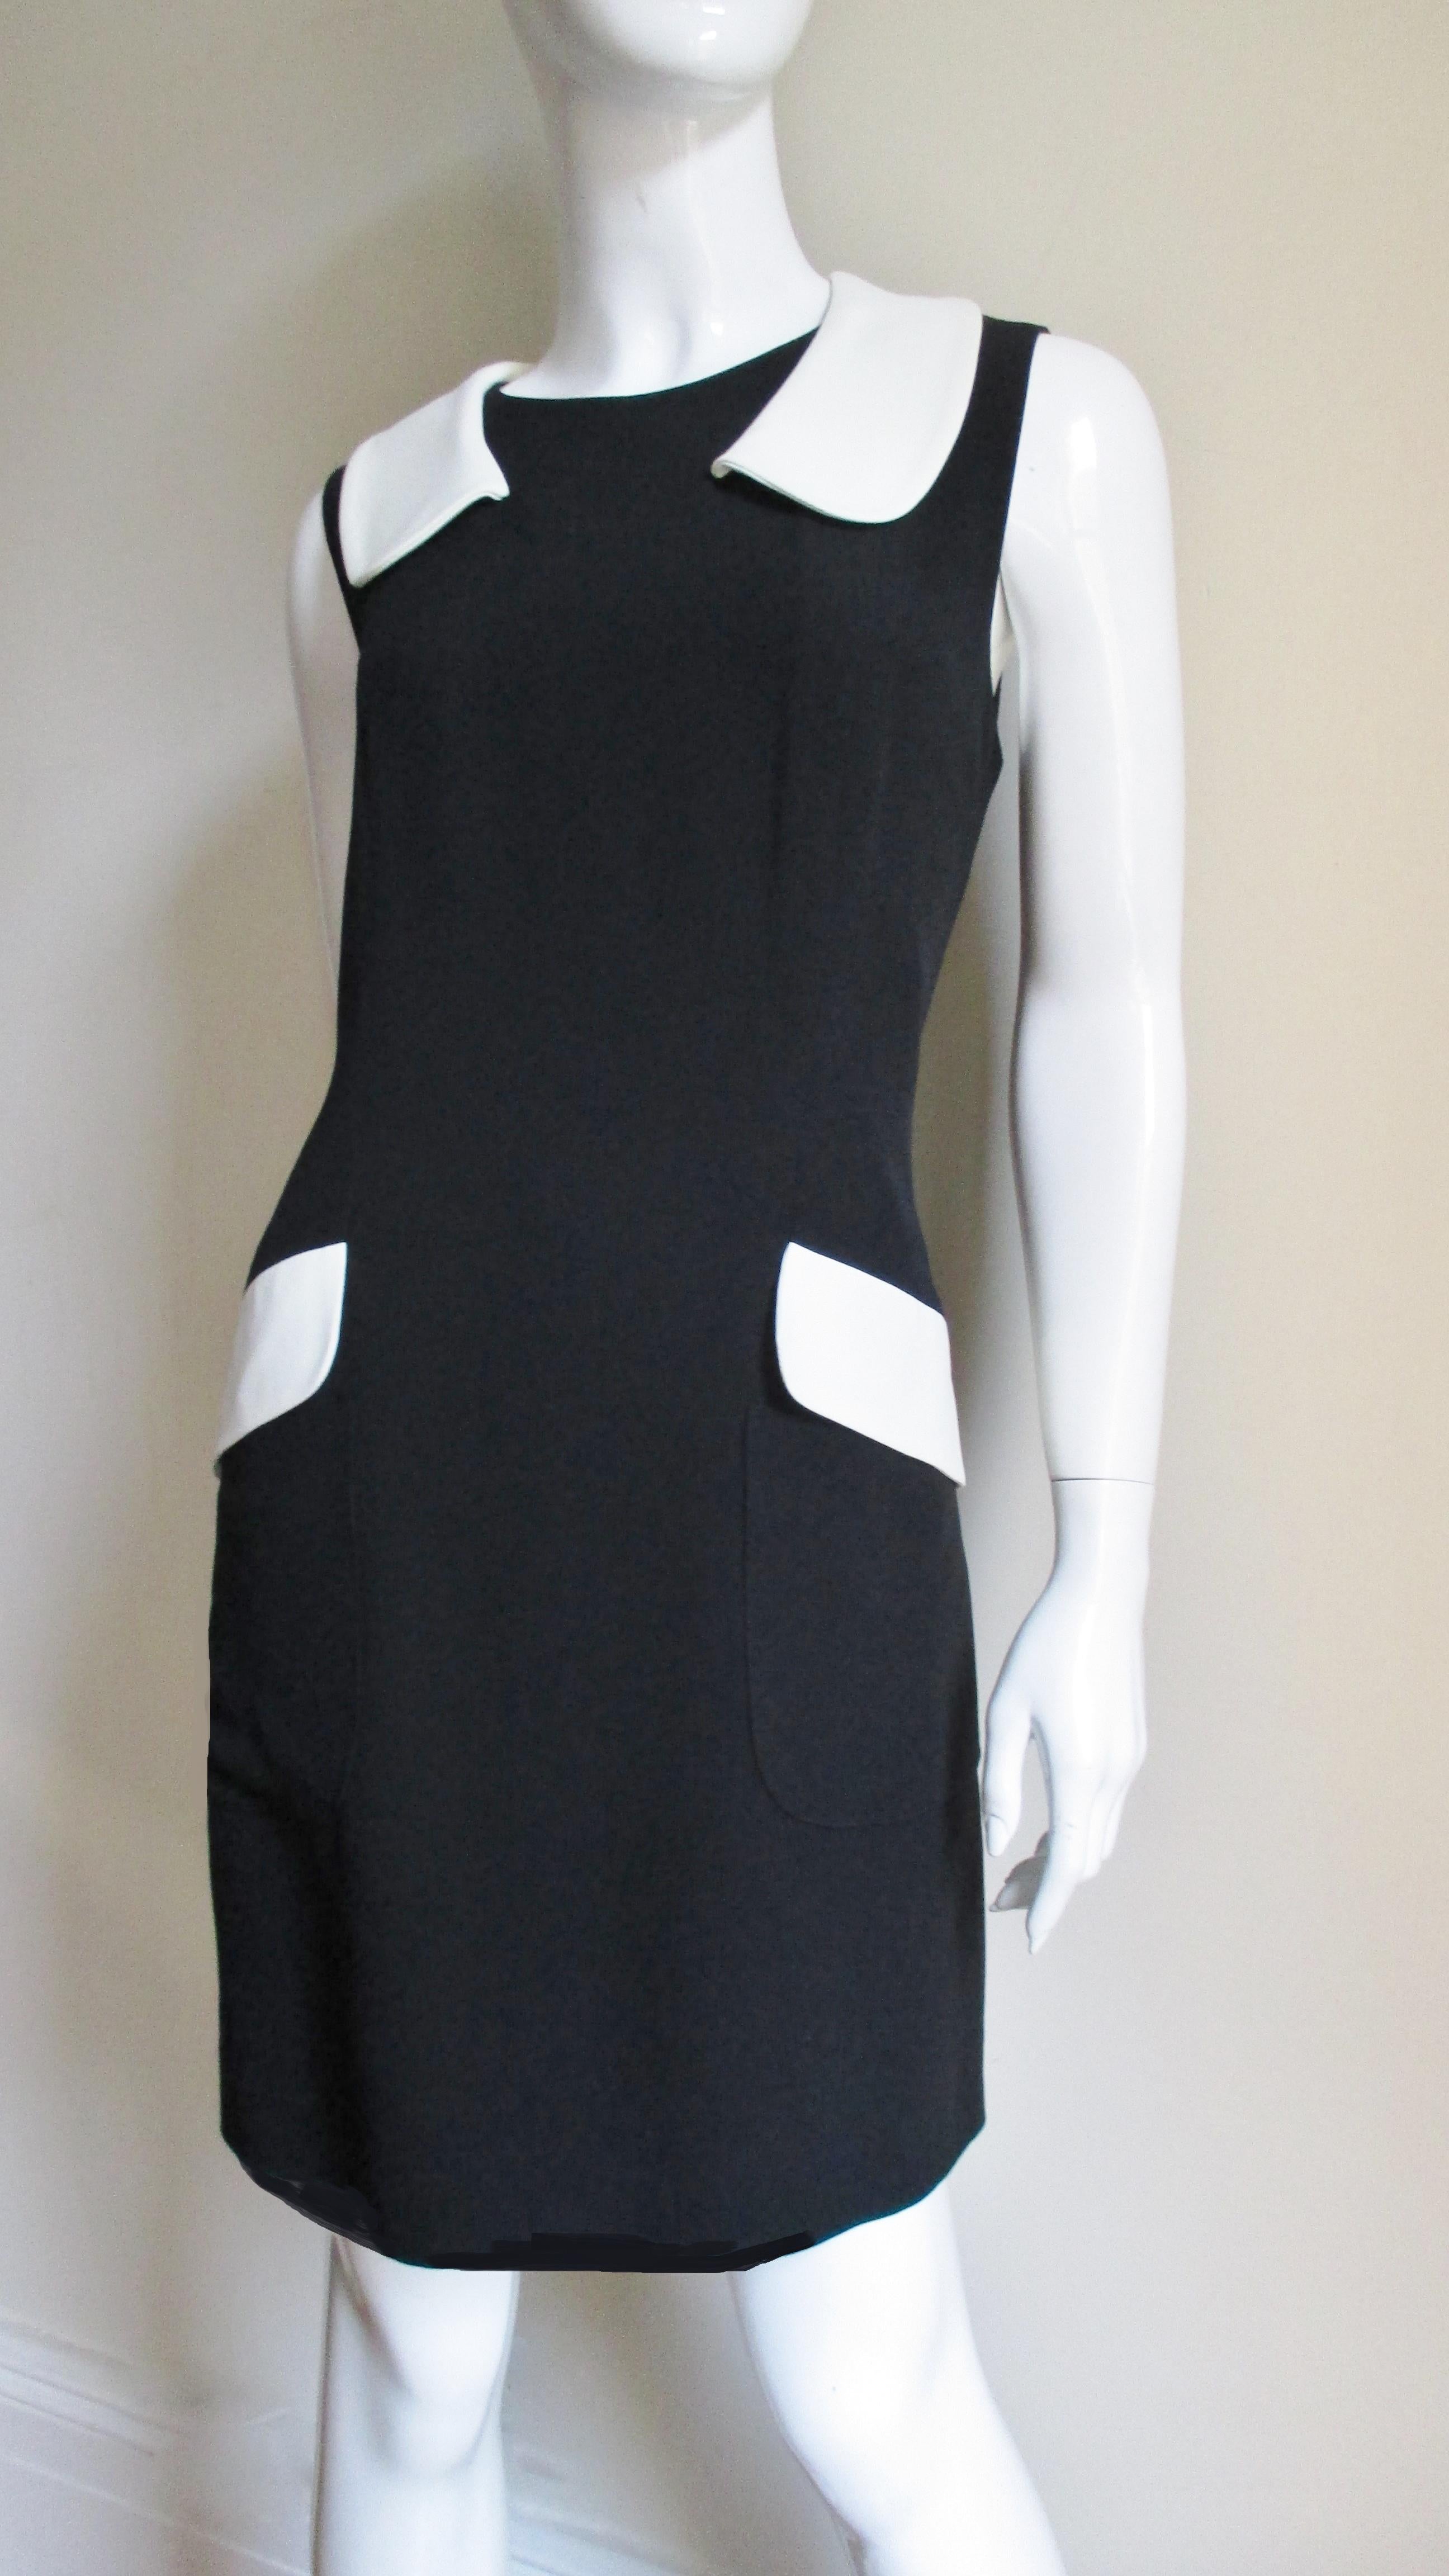 Moschino Color Block Dress In Good Condition For Sale In Water Mill, NY